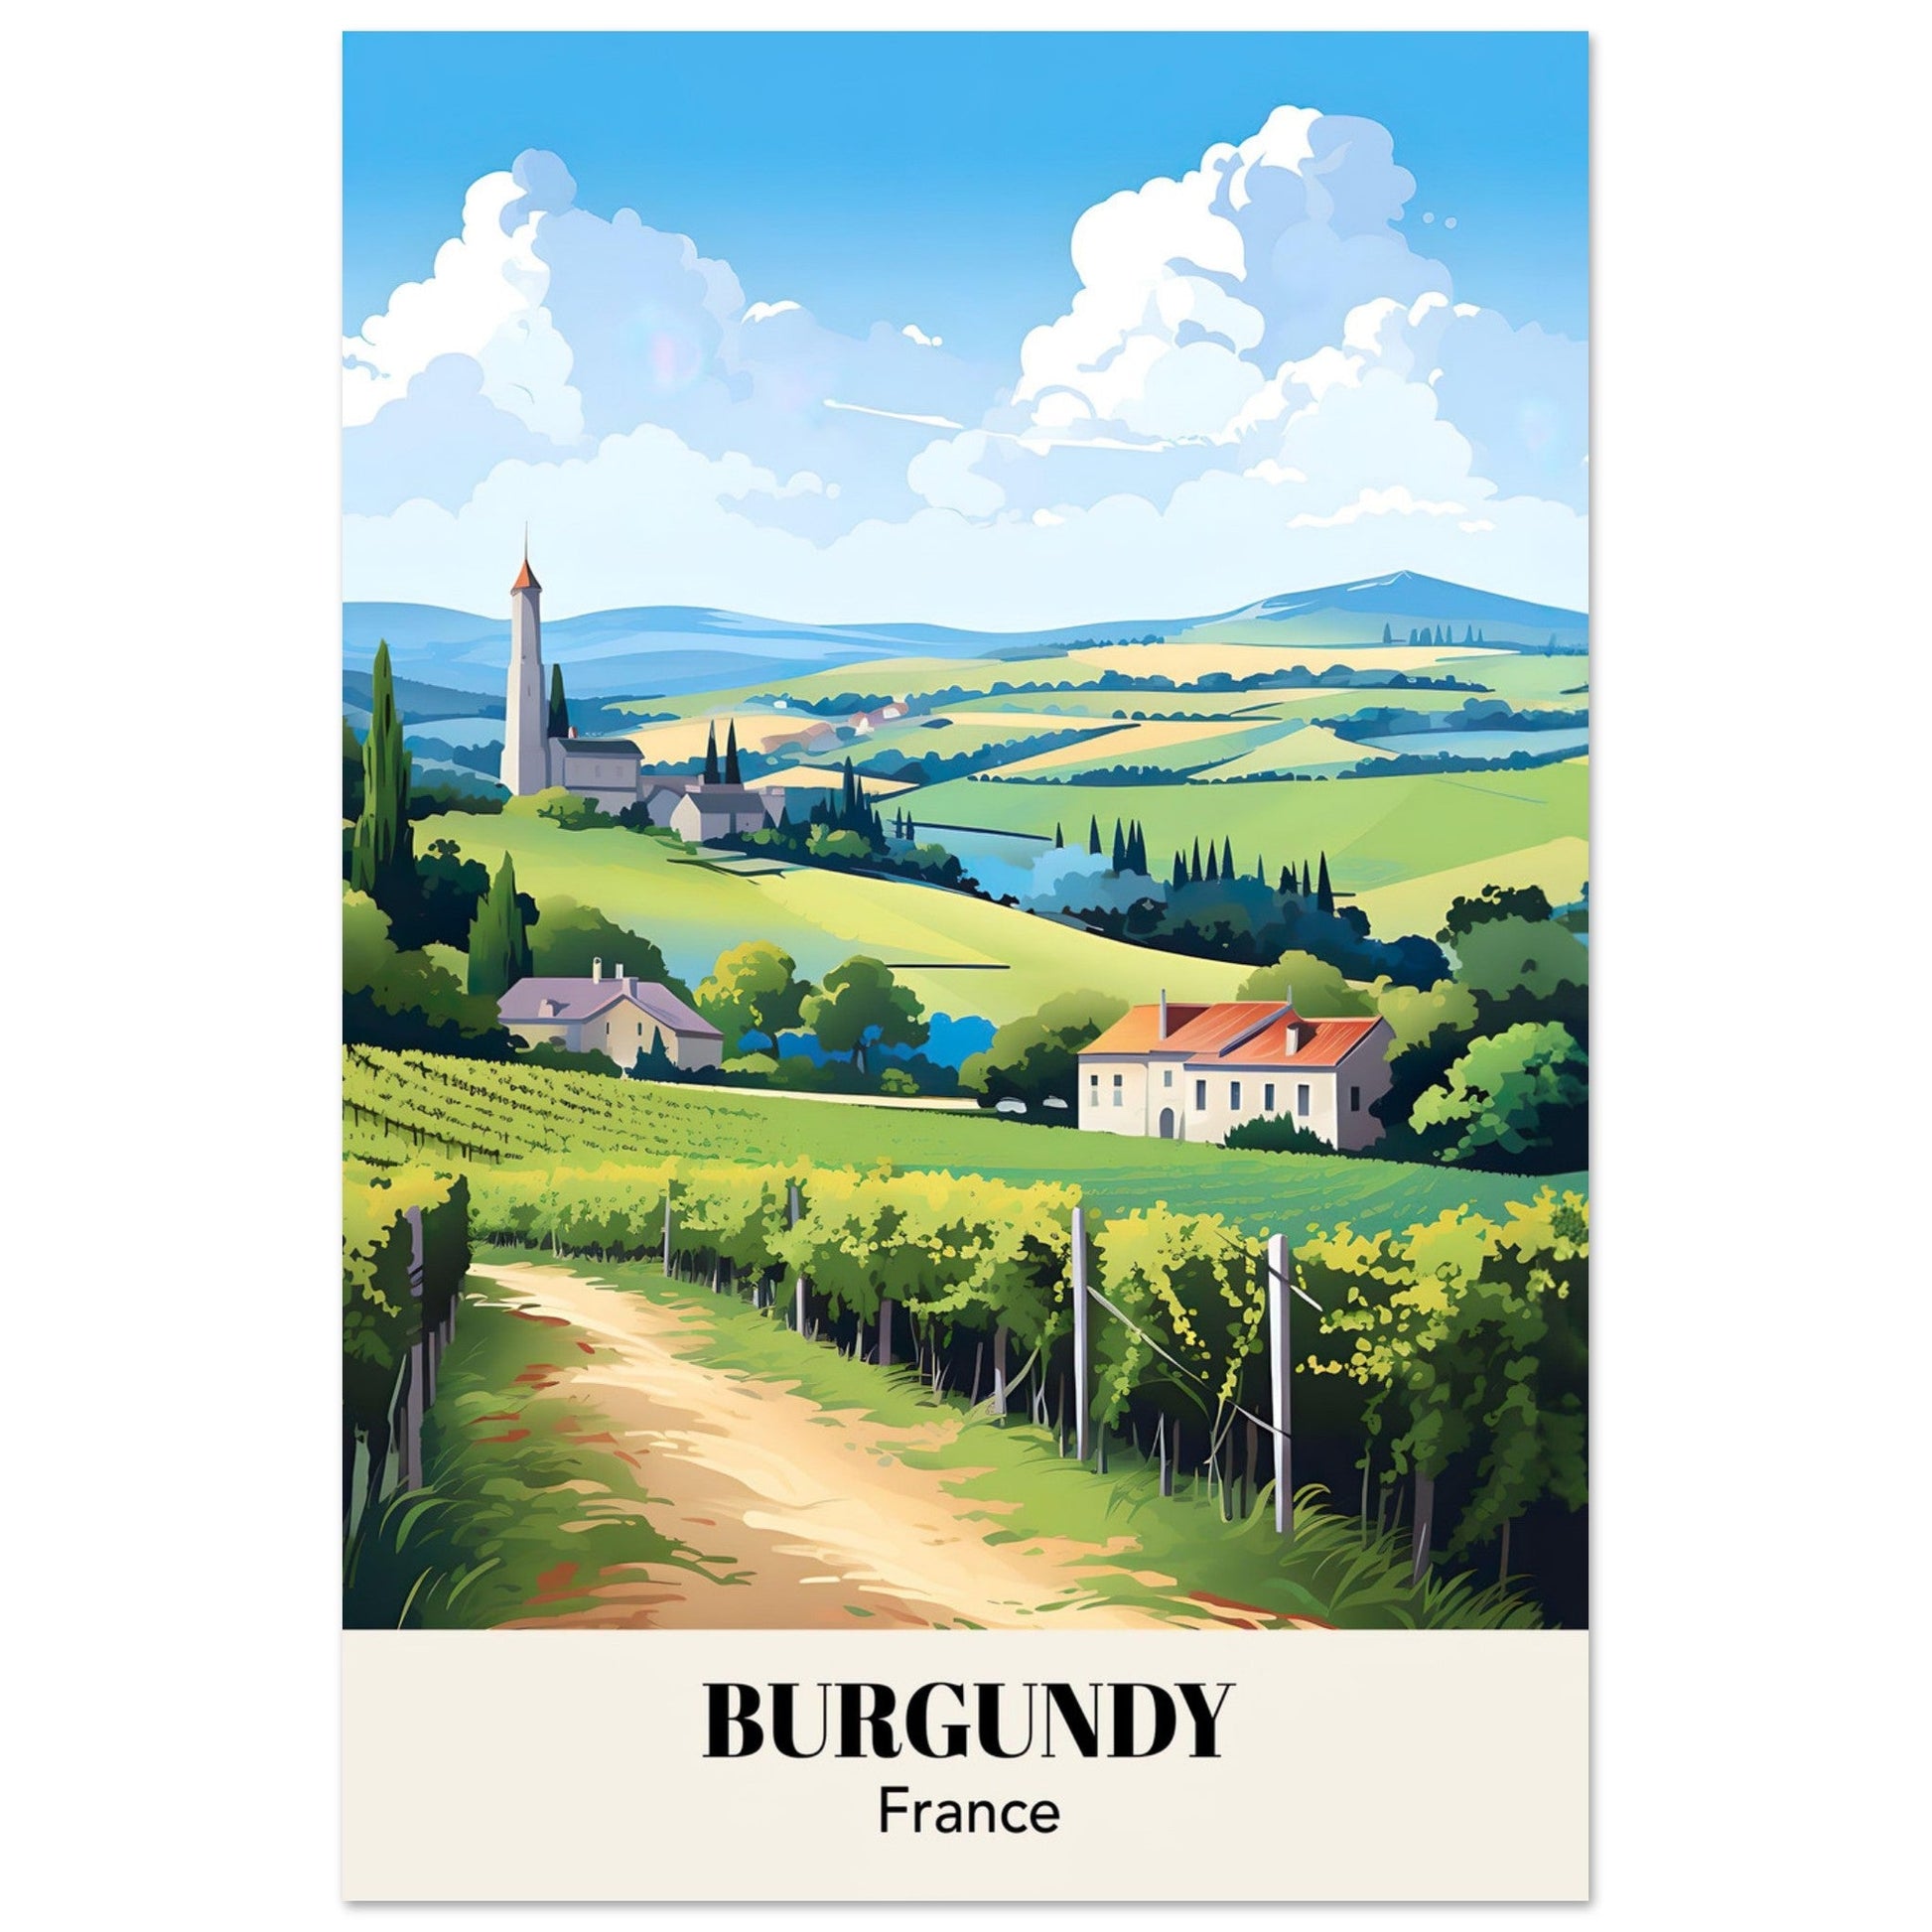 France | Burgundy Retro French County-side Travel Poster | Vintage Wall Art | Colorful Travel Print  - Art Of Whim